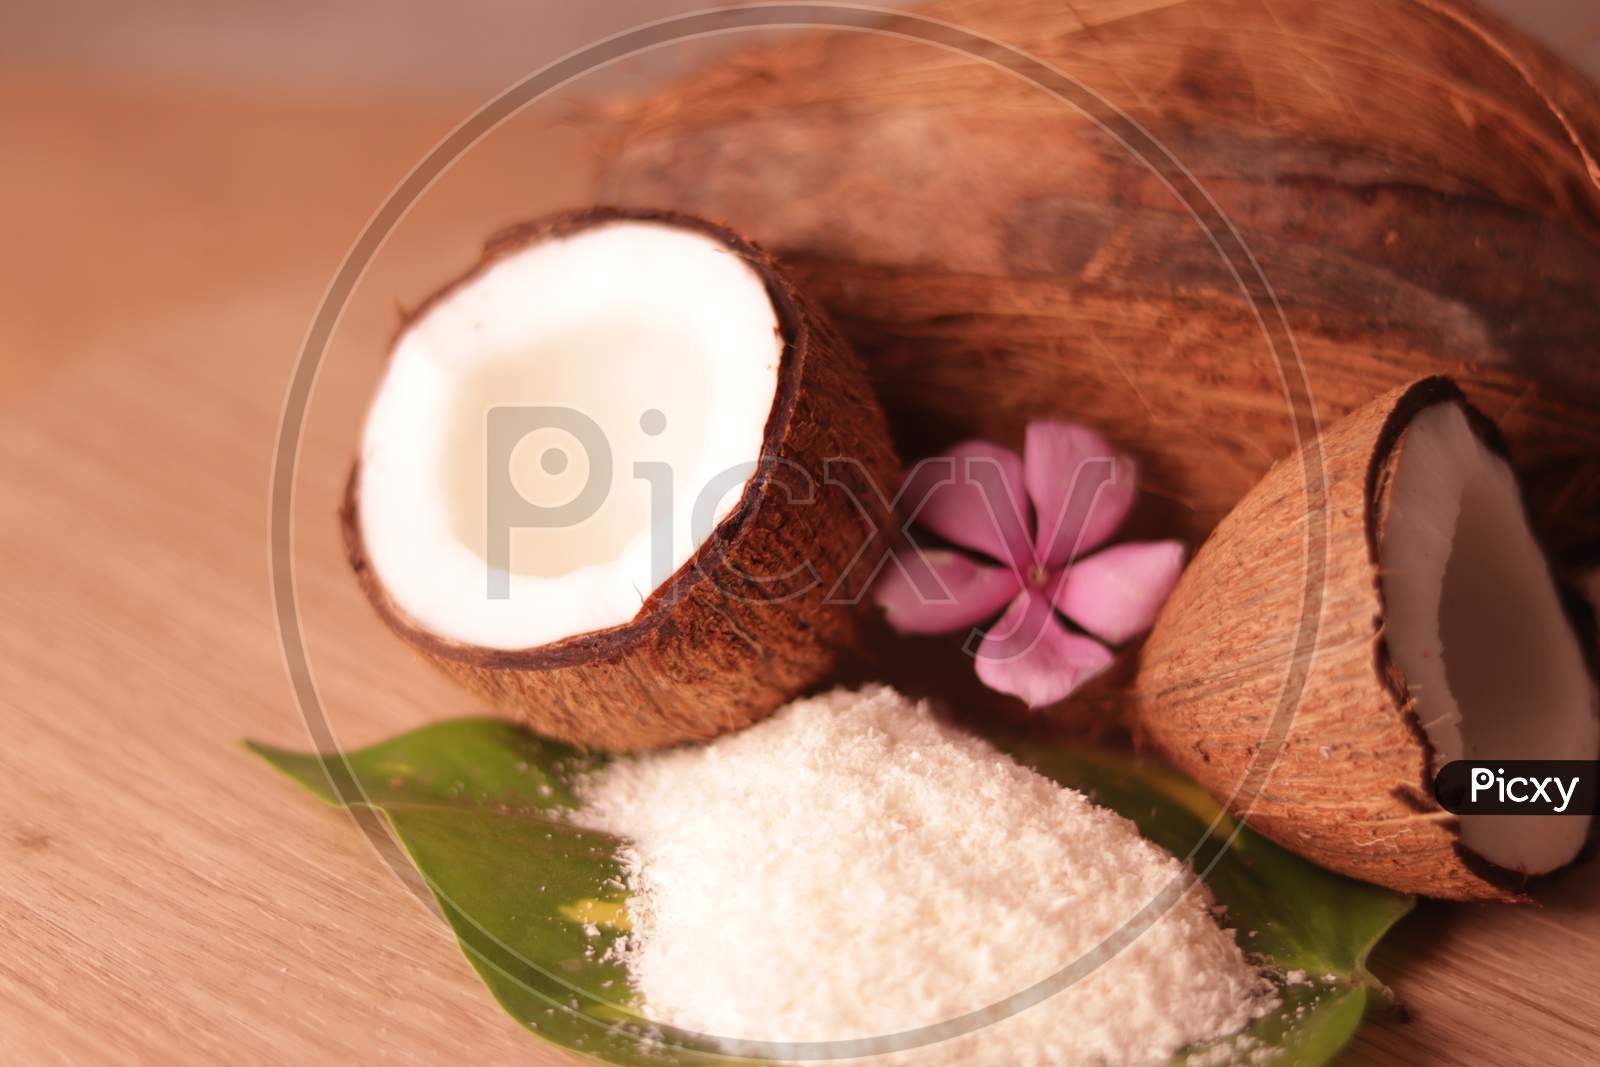 White Coconut And Coconut Powder On Green Leaves Beautiful View,Hd Footage Of Fresh Coconut Family,Healthy Ingredients,Selective Focus On Subject,